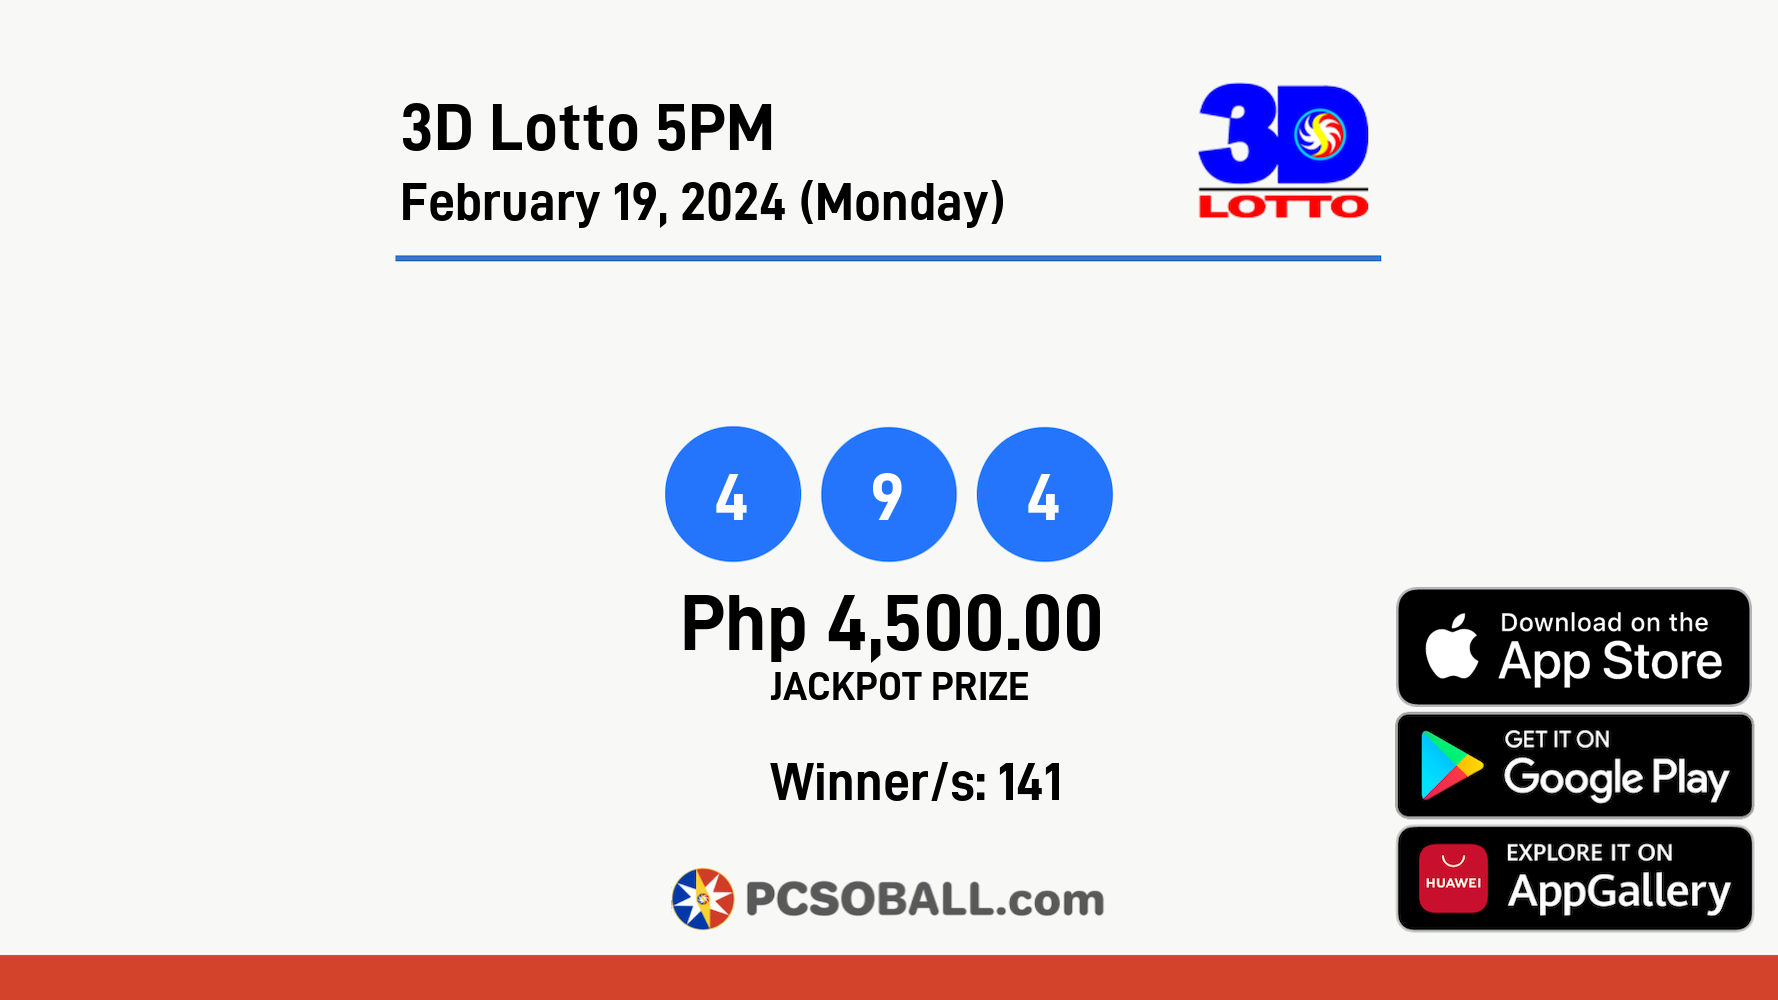 3D Lotto 5PM February 19, 2024 (Monday) Result